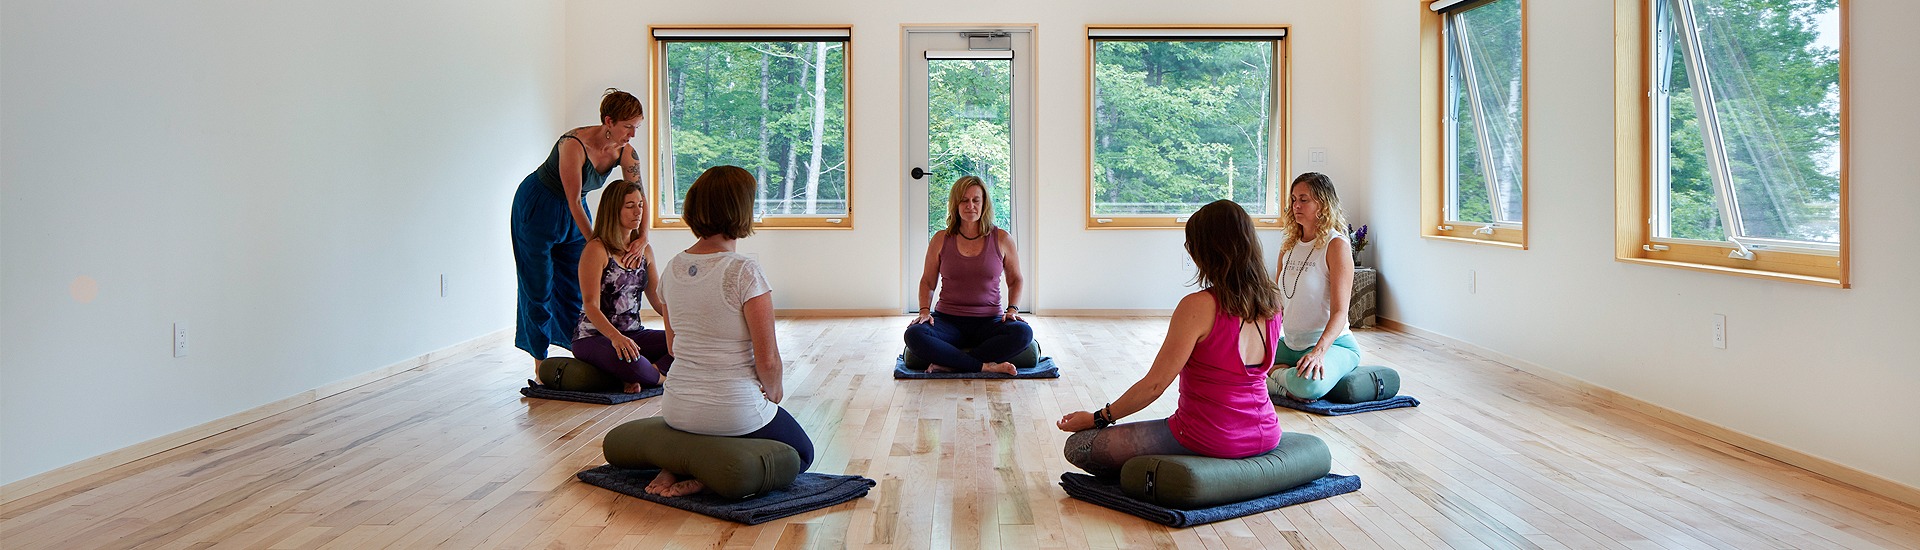 Internal view of a room with a group of people doing yoga